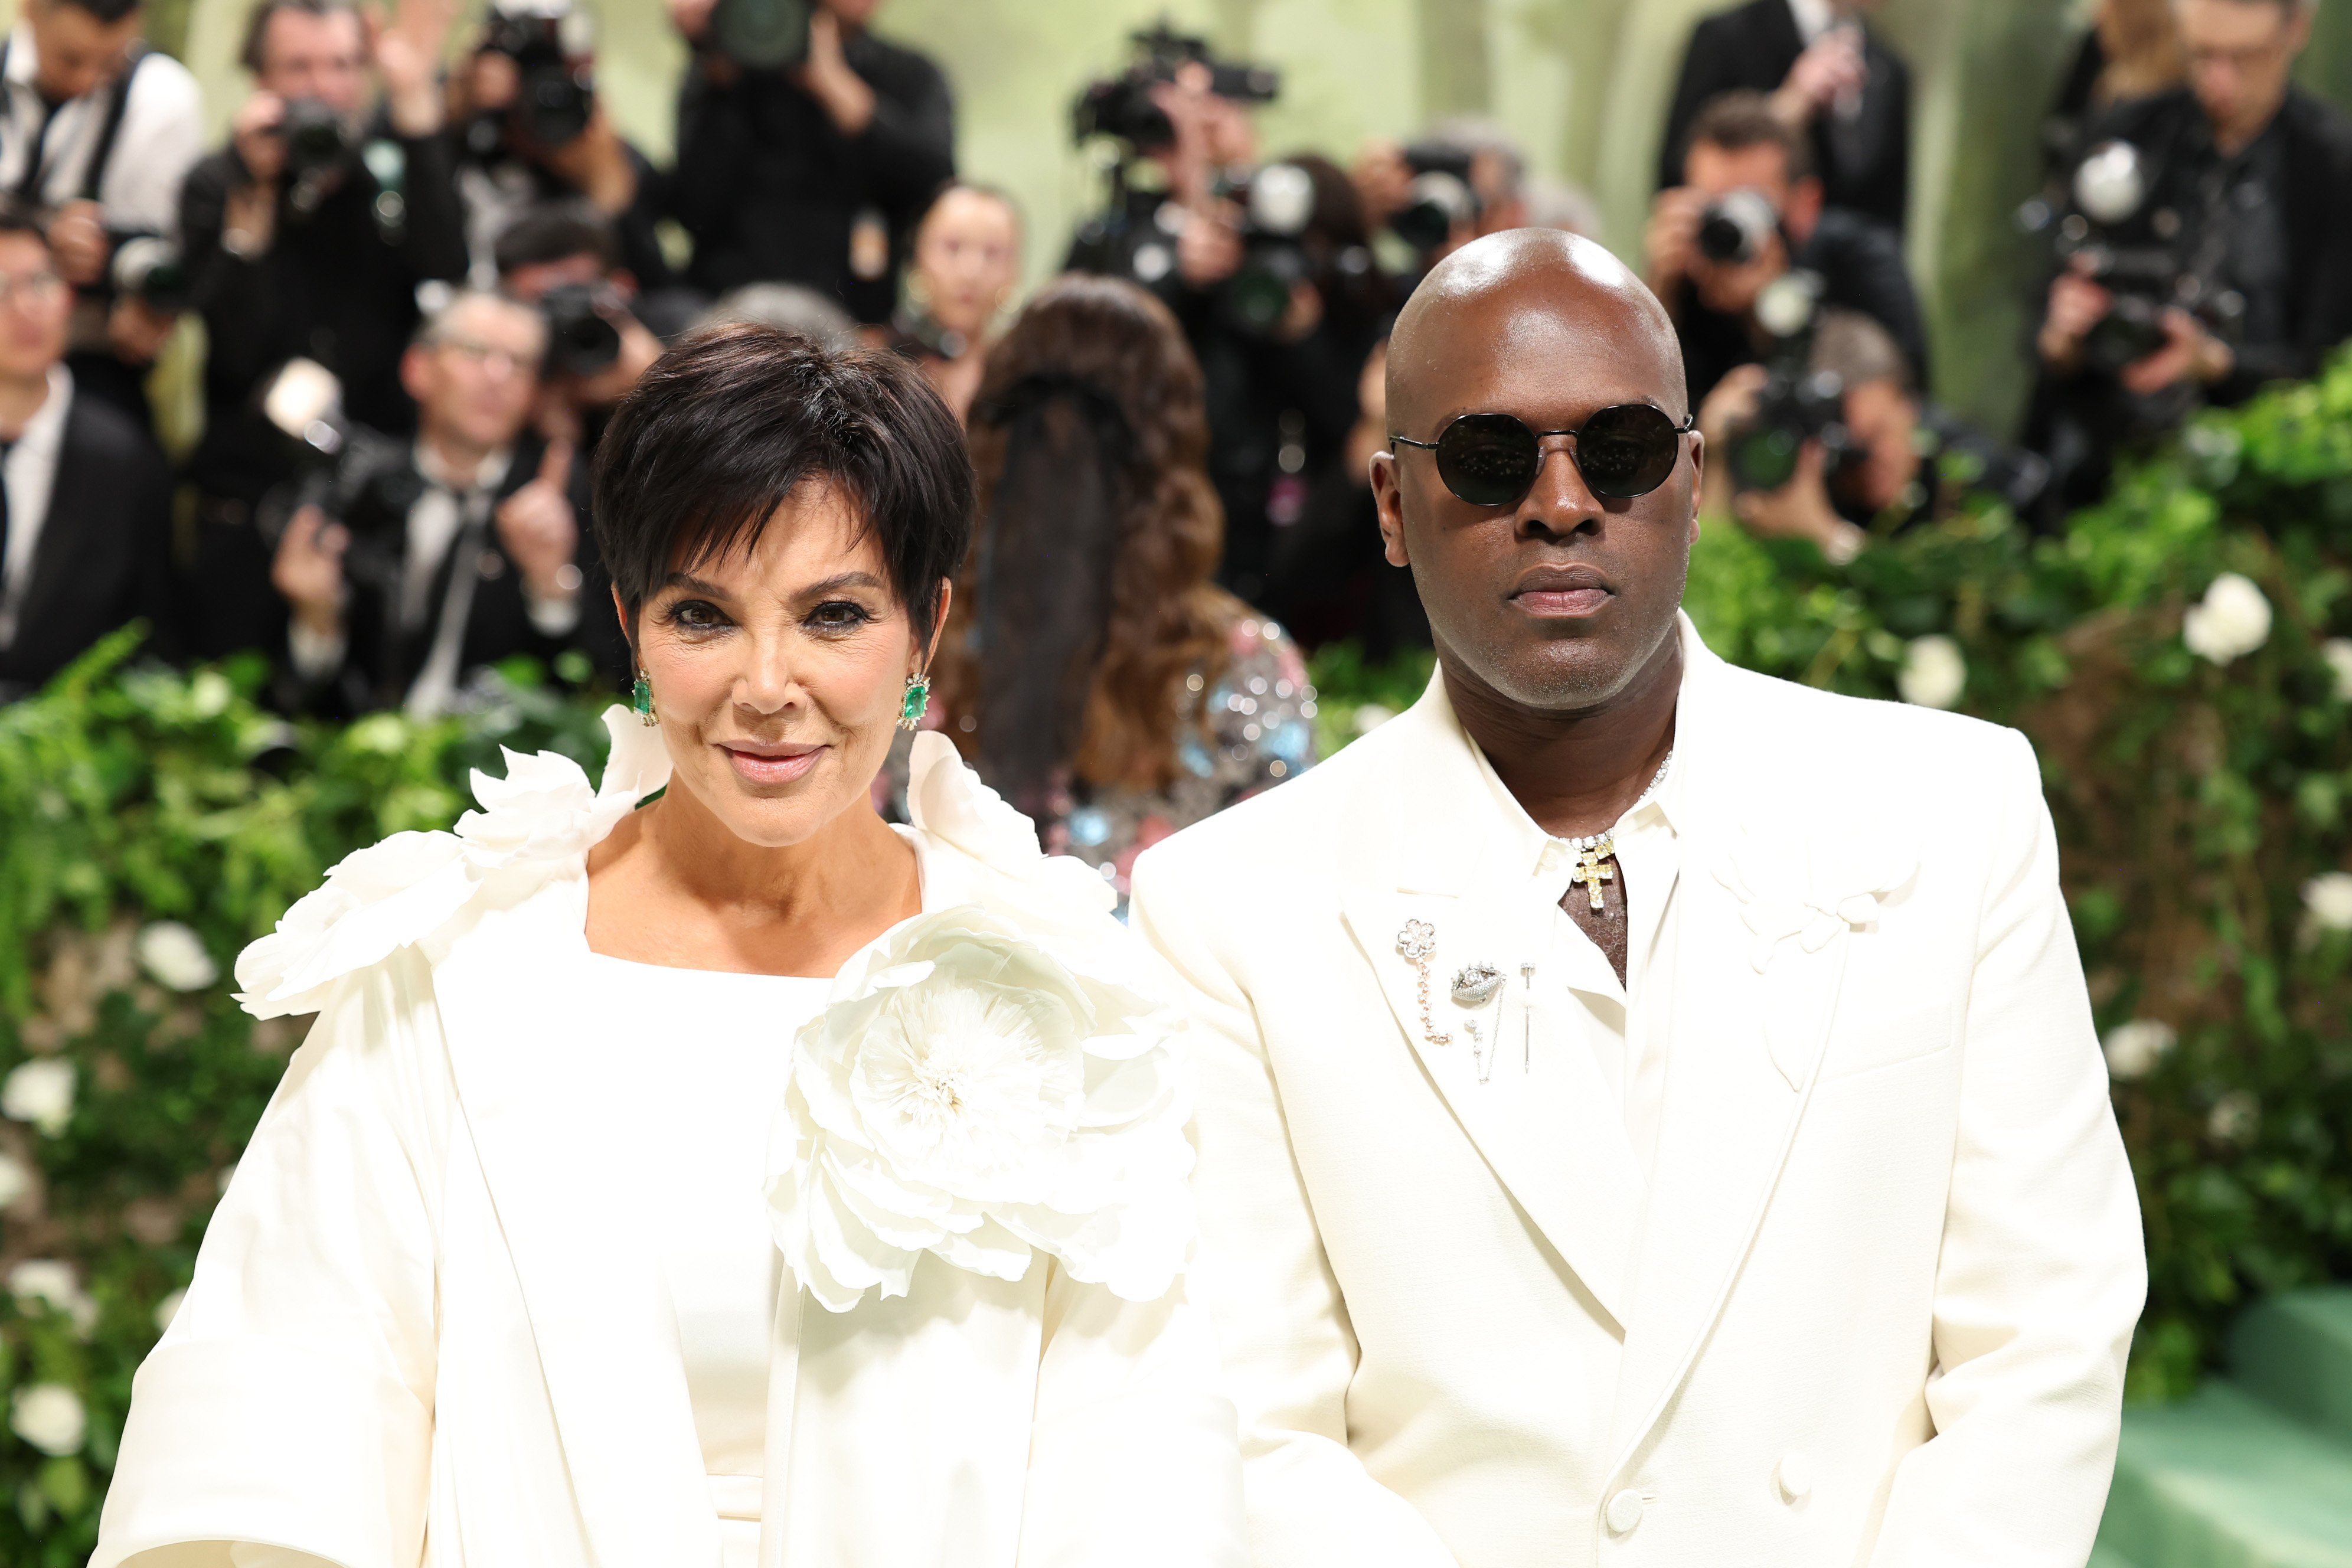 the kardashians have arrived at the met gala, here's what they're wearing